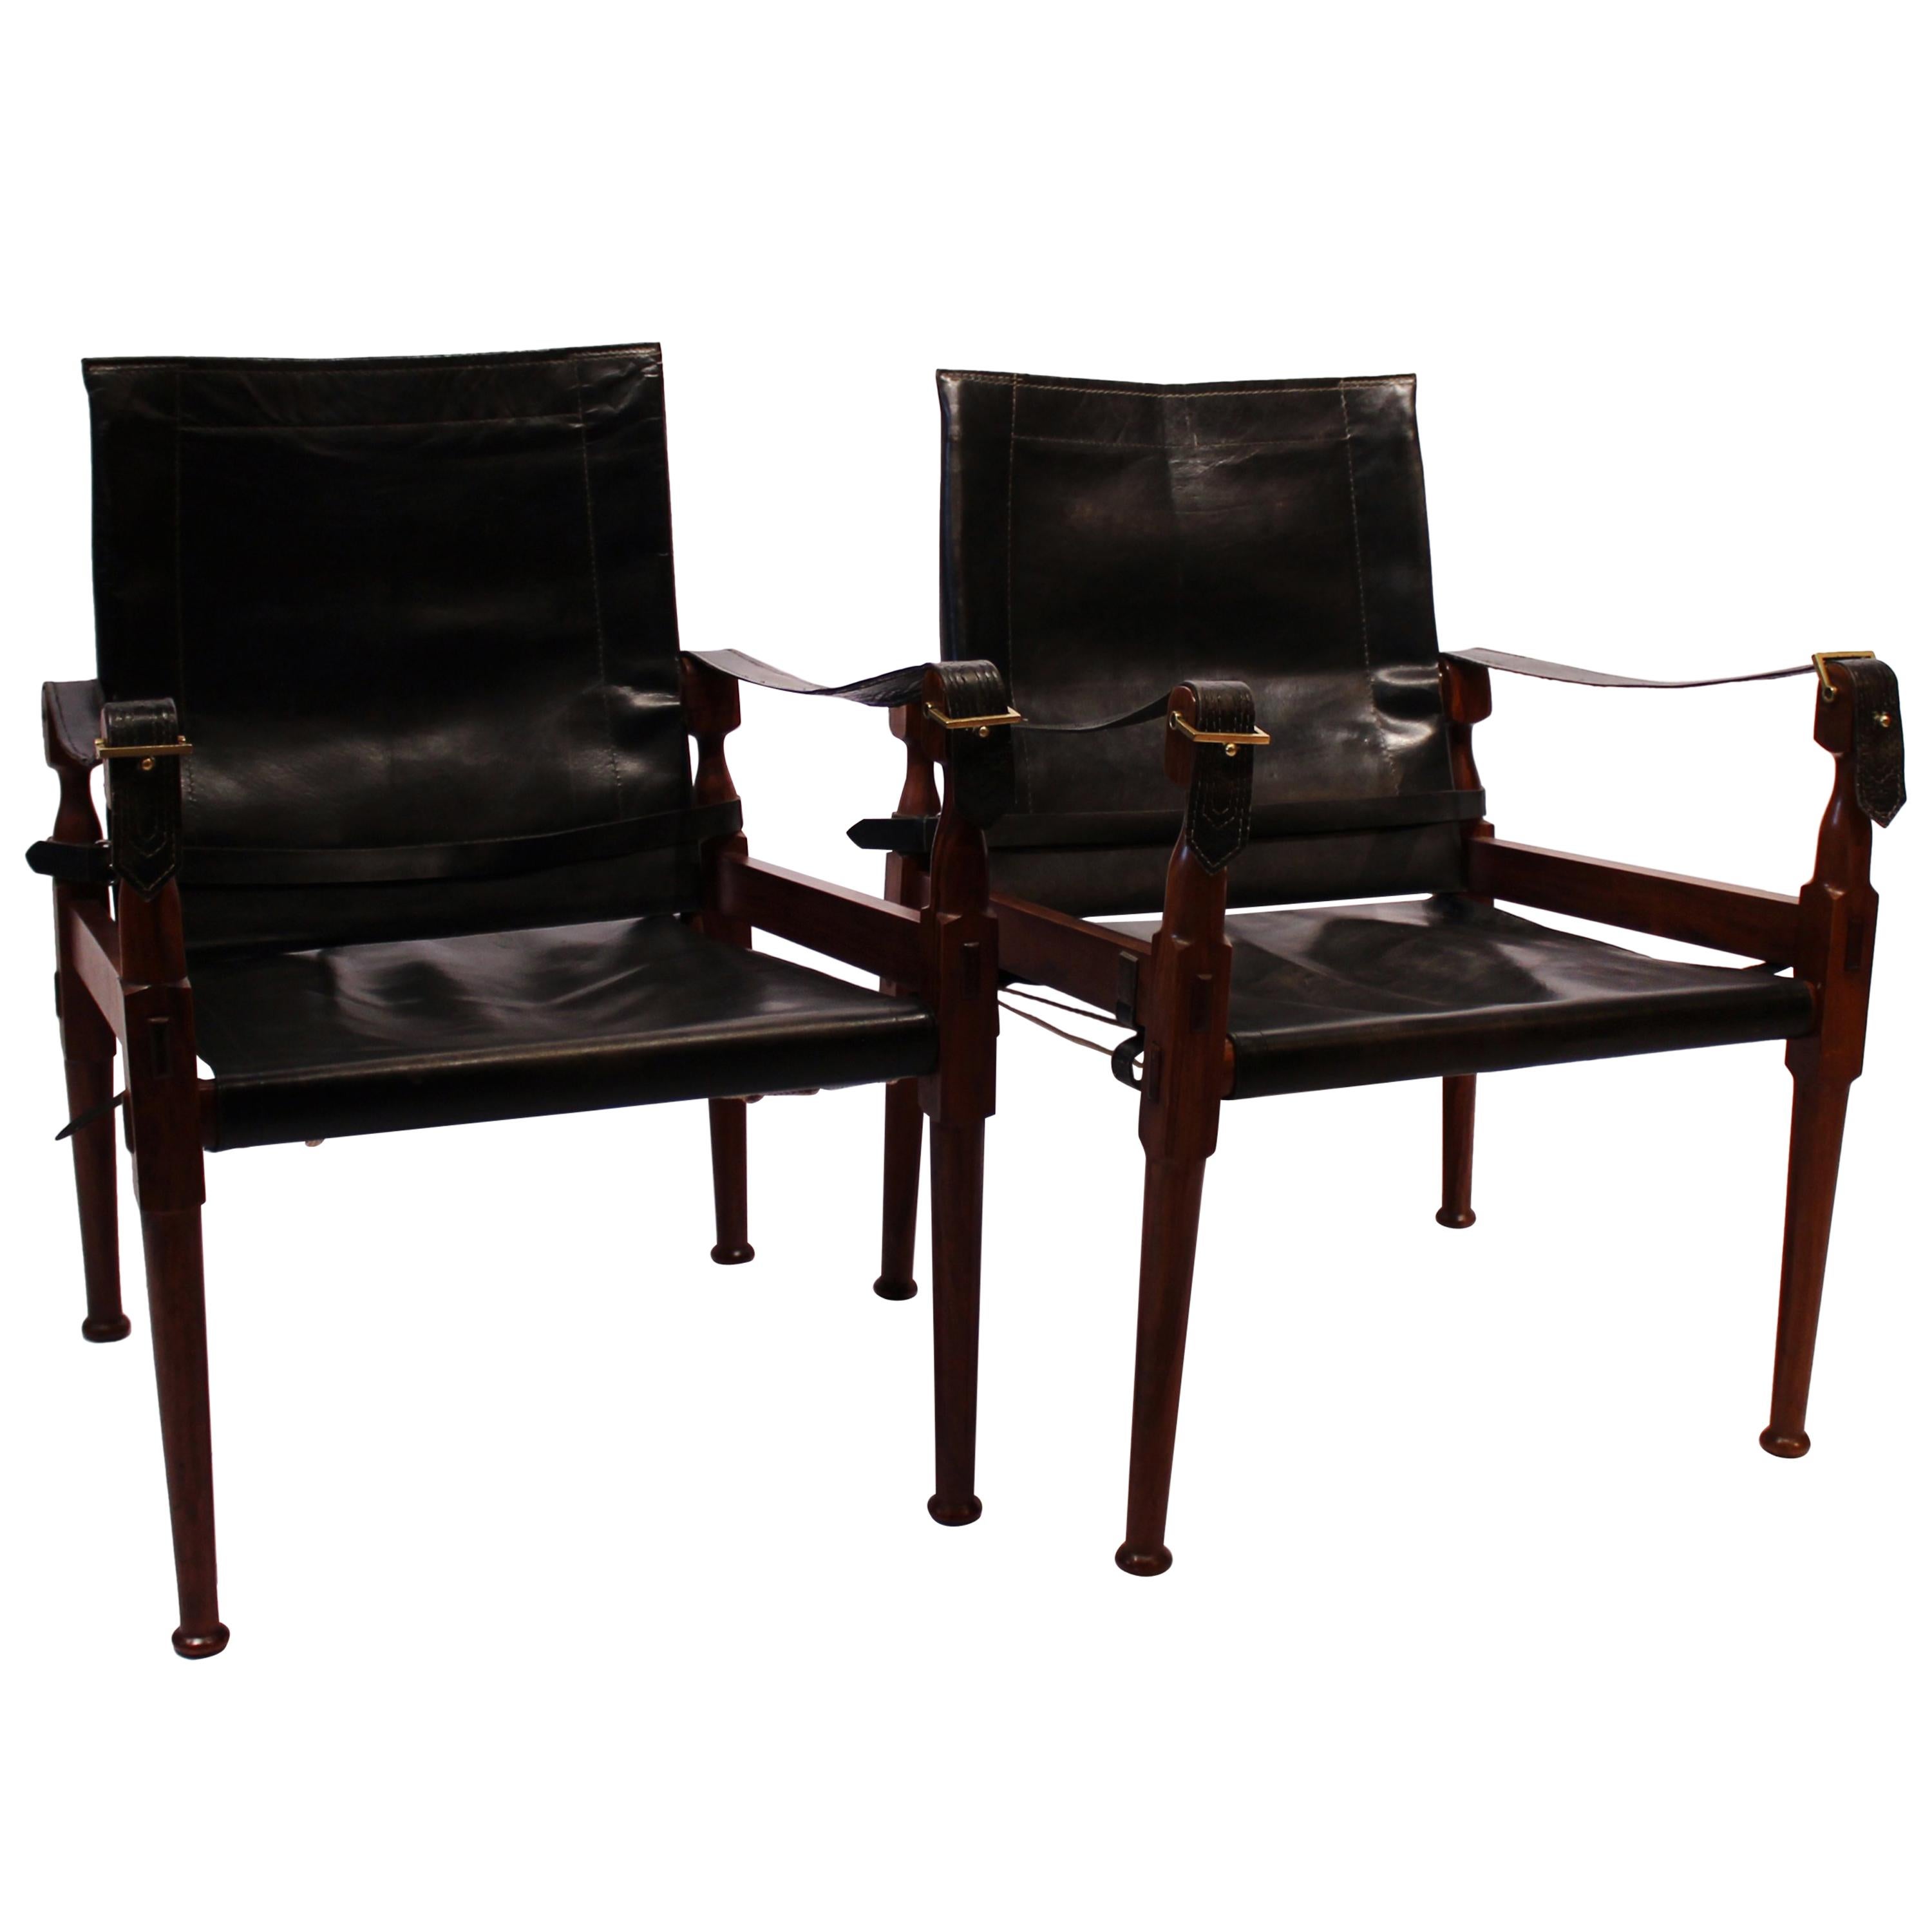 Pair of Safari Chairs in Walnut and Black Patineret Leather, 1960s